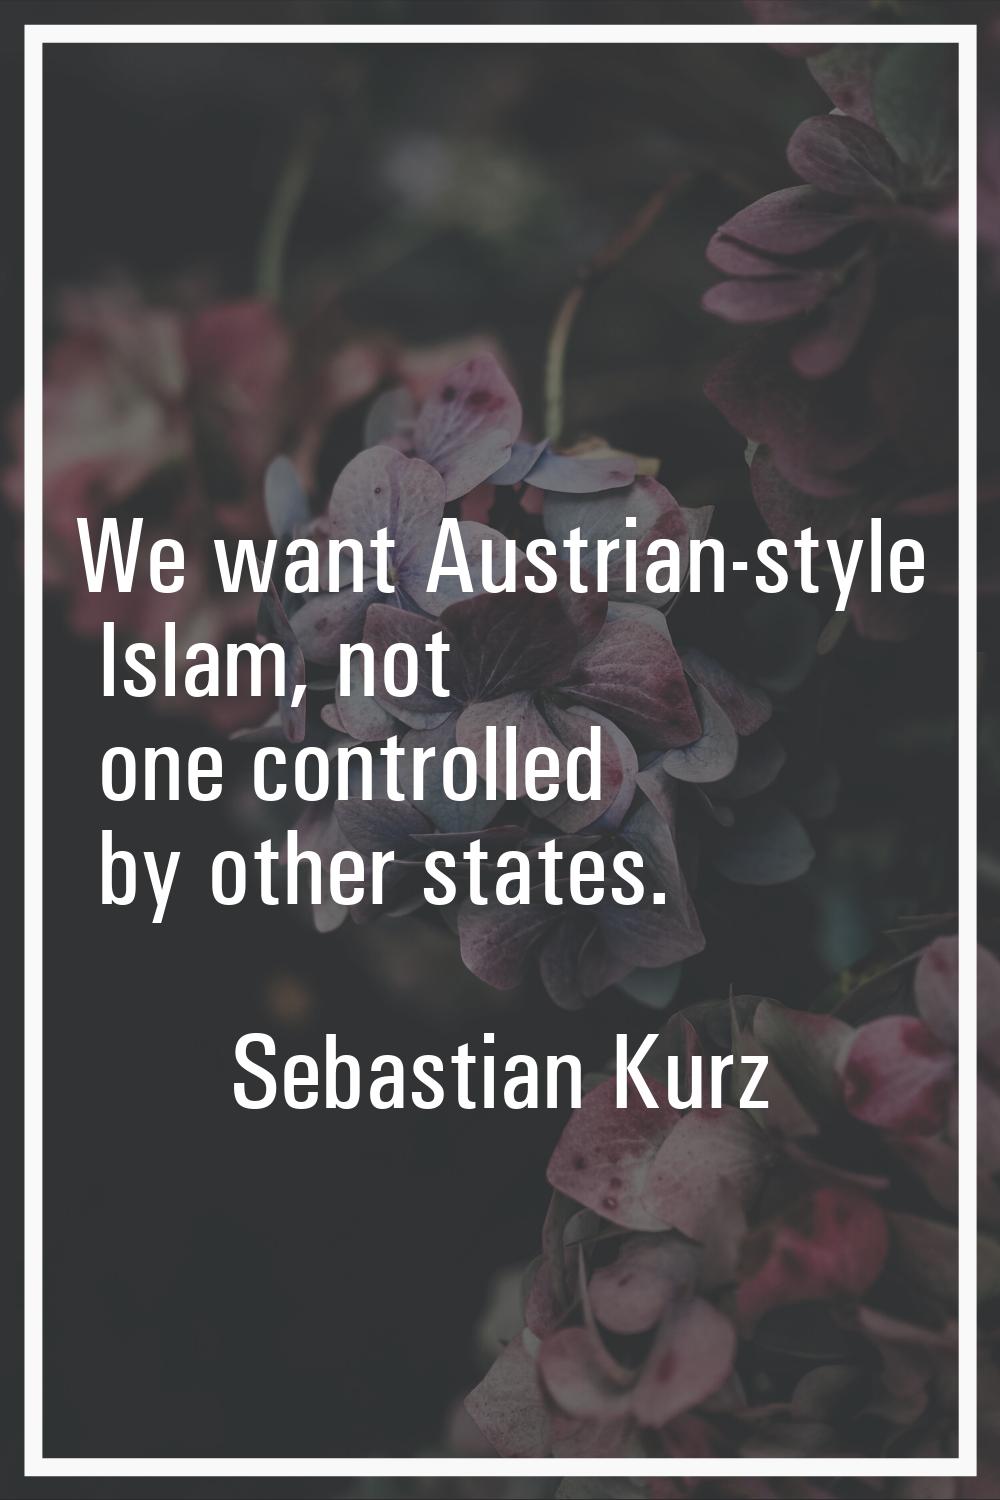 We want Austrian-style Islam, not one controlled by other states.